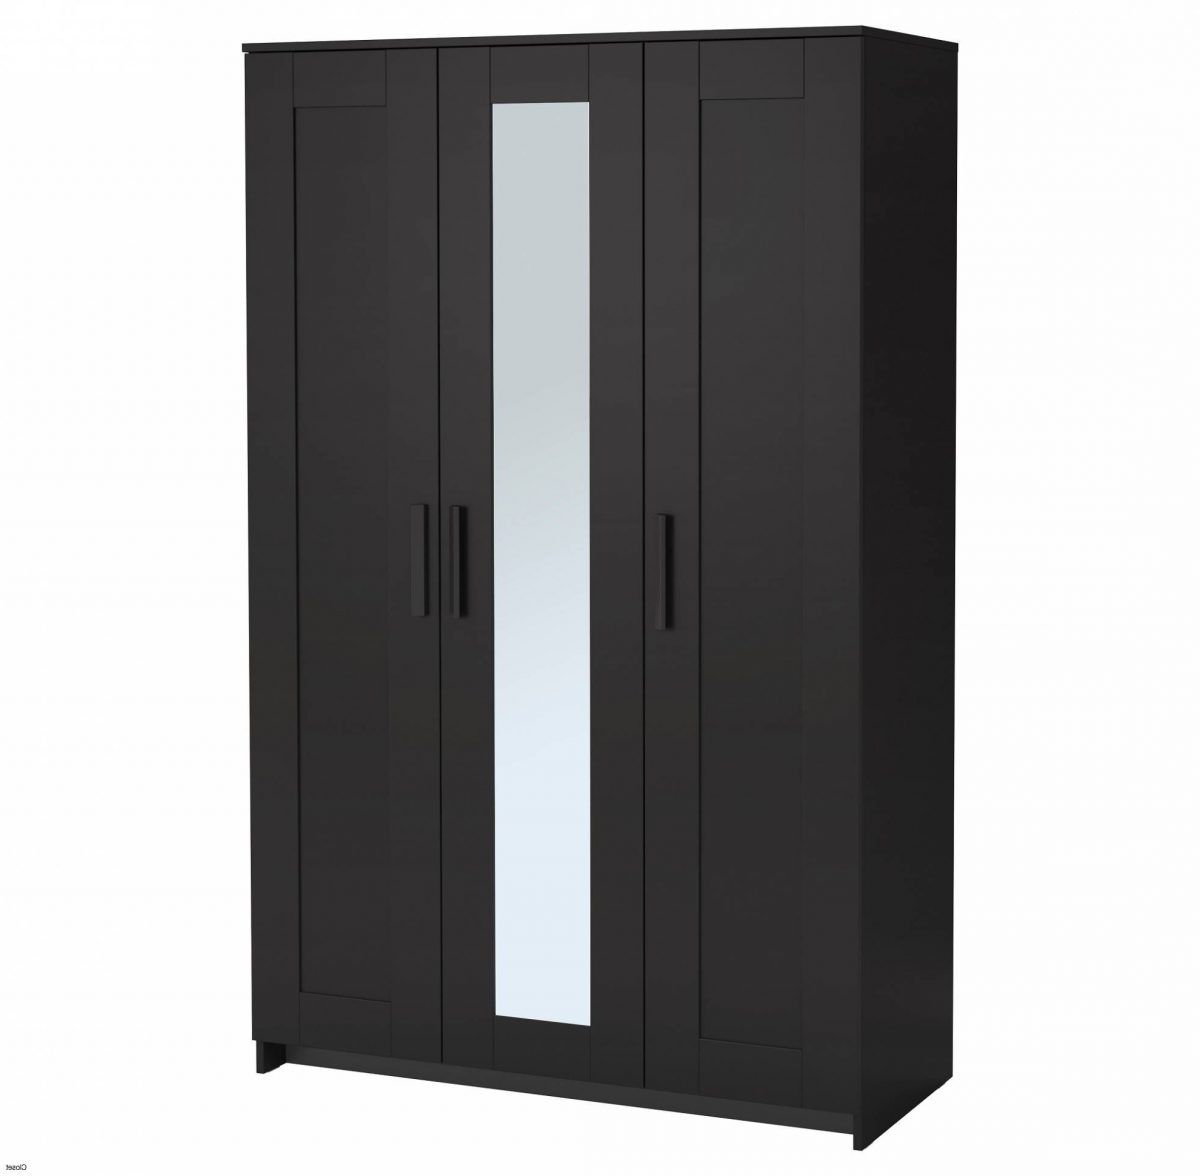 11 Elegant Cheap Black Wardrobes • Tactical Being Minimalist Within Well Liked Cheap Black Wardrobes (View 3 of 15)